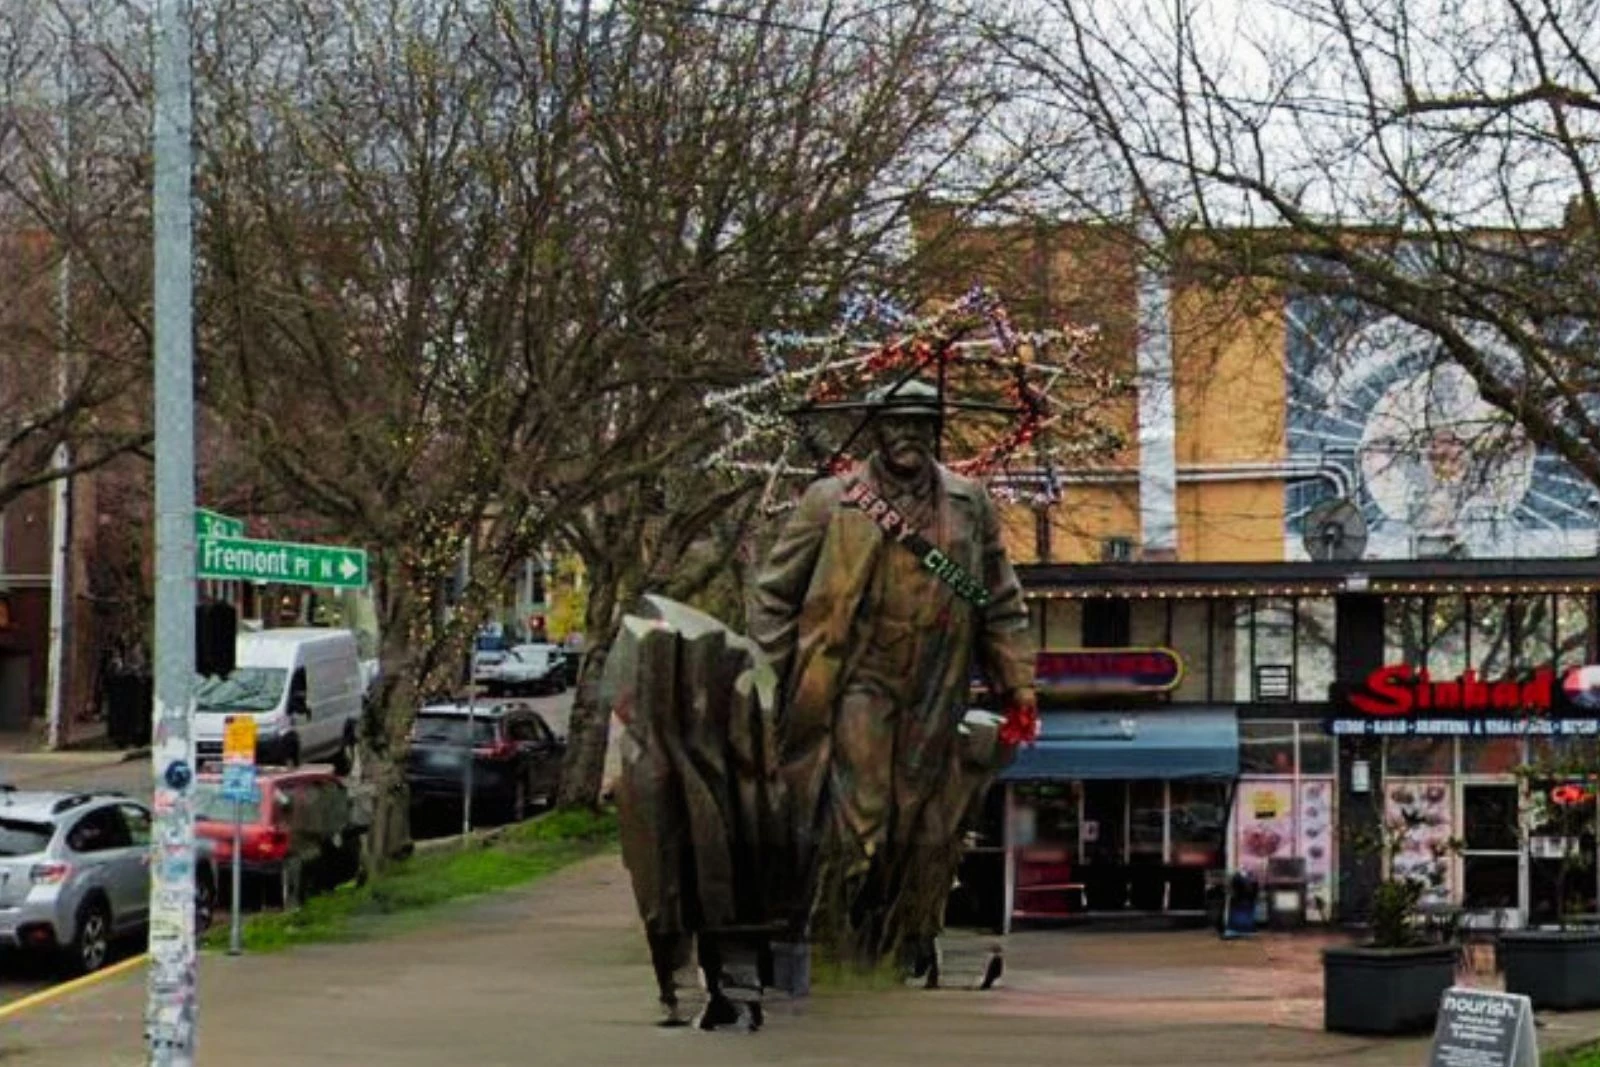 Where Is the Lenin Statue in Fremont located?